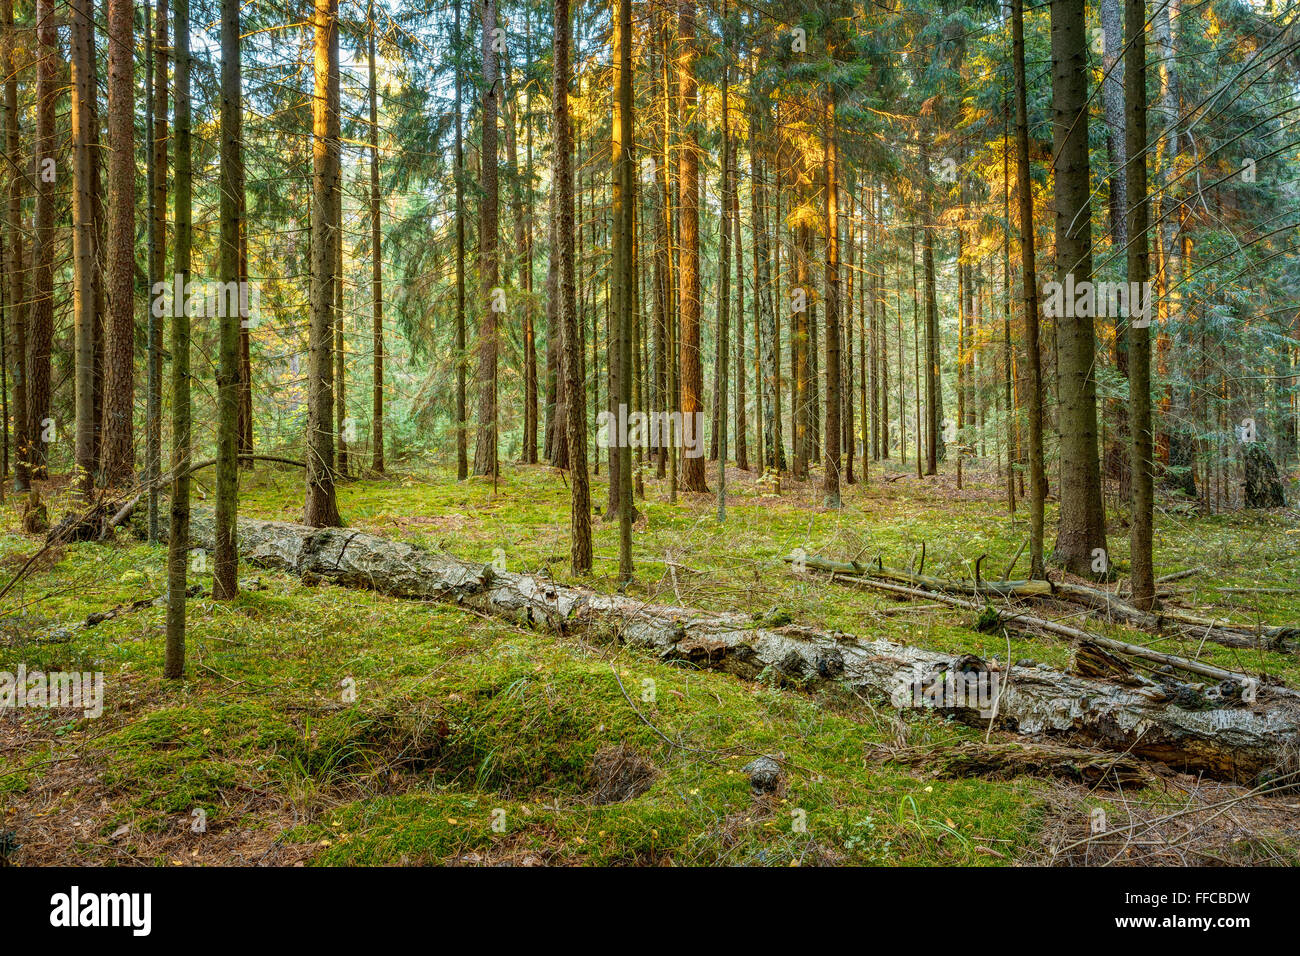 Wild autumn forest. Fallen trees in green coniferous forest reserve Stock Photo